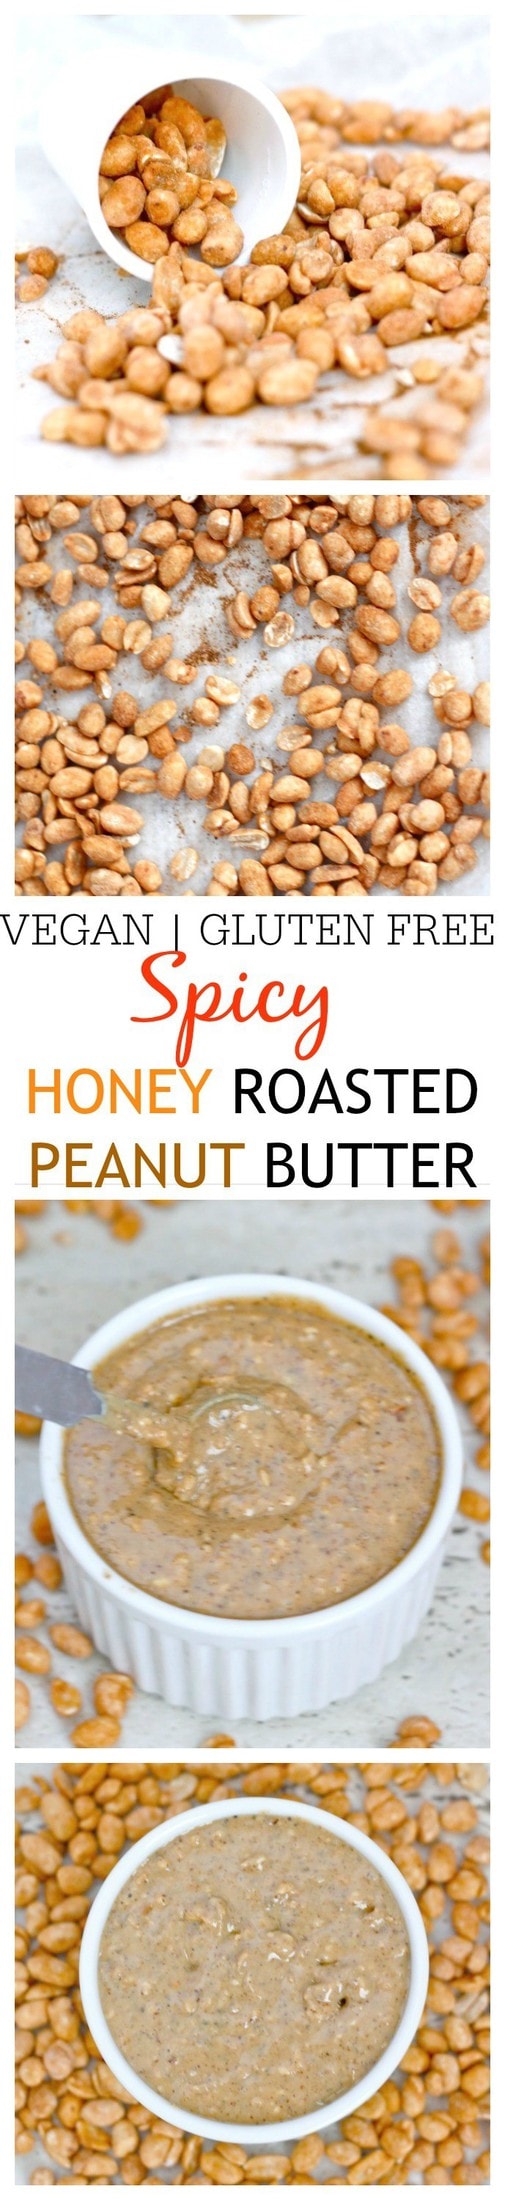 Spicy Honey Roasted Peanut Butter- Just 5 minutes and a high speed blender is all you'll need to whip up the BEST tasting peanut butter ever- Spicy, sweet, salty- It's a texture lover's dream which is also gluten free, refined sugar free and a vegan option!  @thebigmansworld -thebigmansworld.com